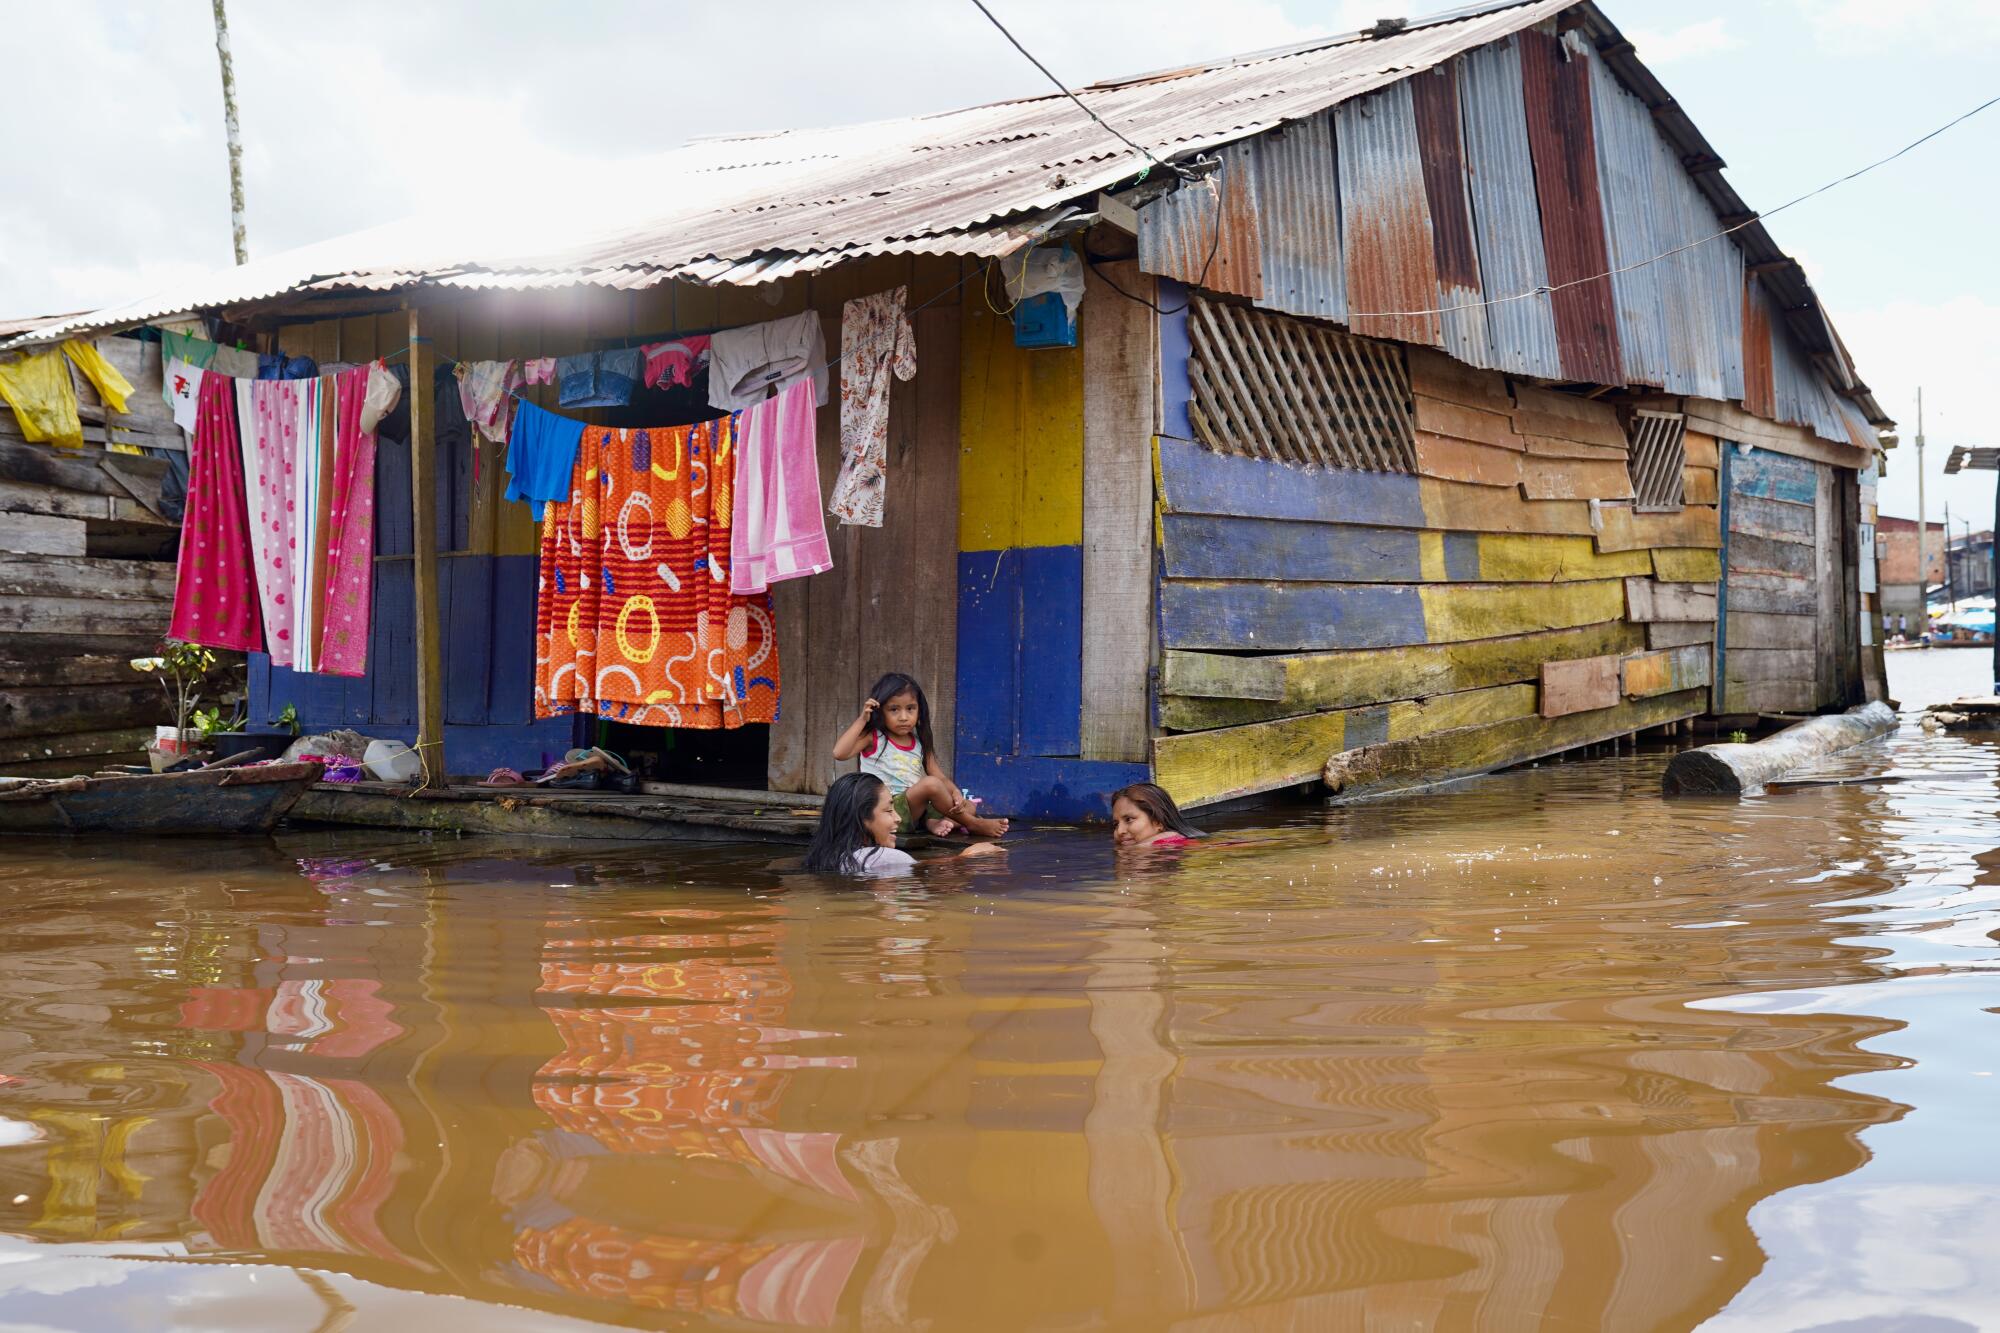 A home built above the water in the port district of Belen in Iquitos, Peru.